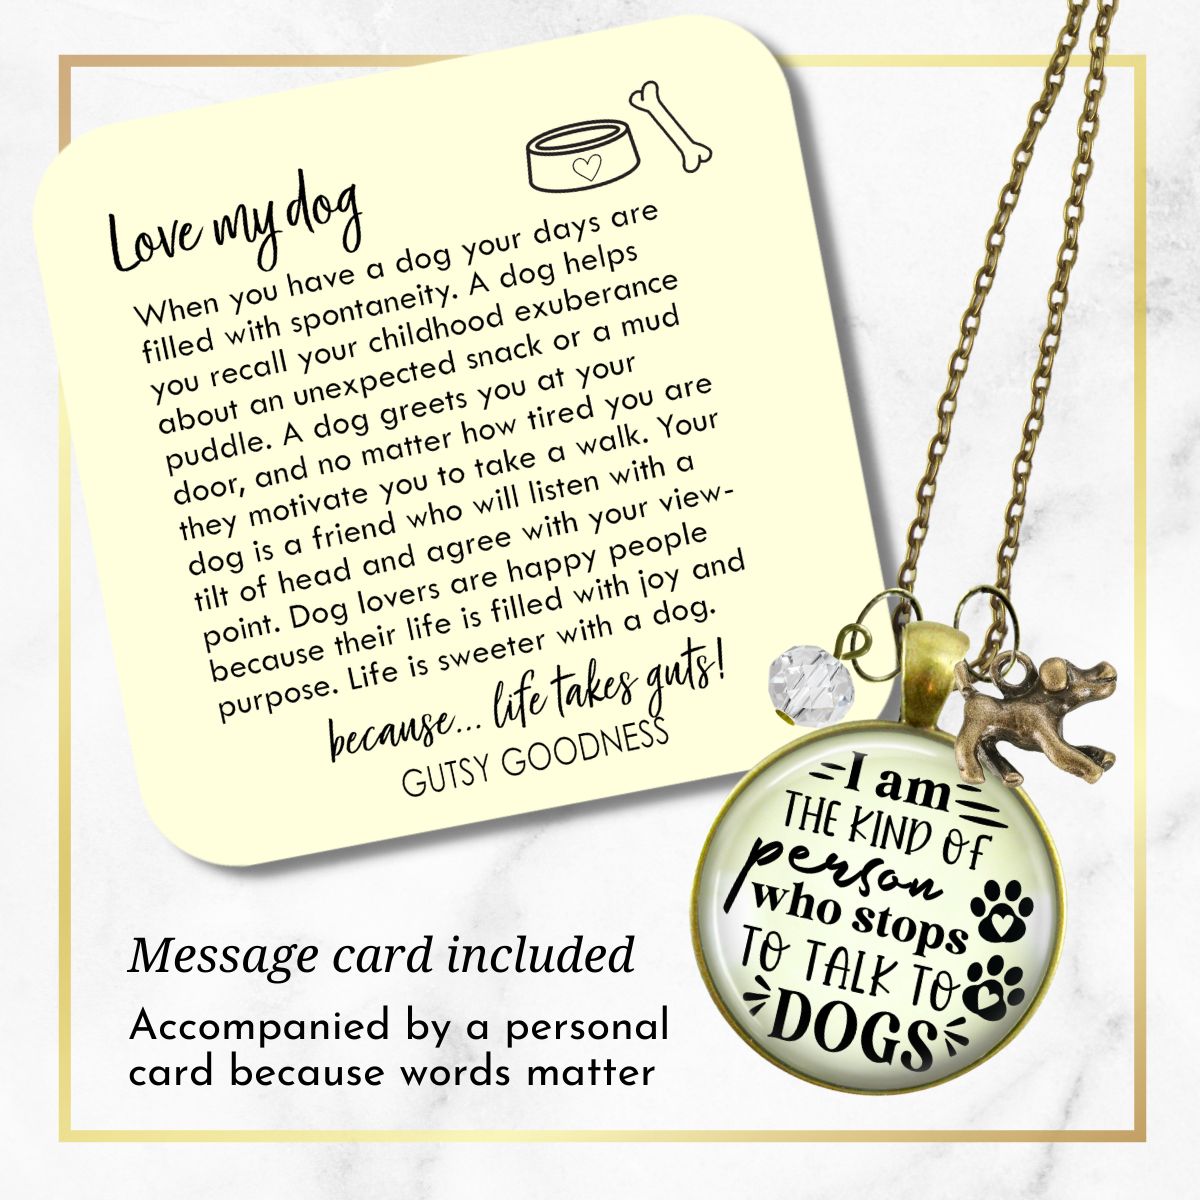 Handmade Gutsy Goodness Jewelry I Am The Kind Of Person Who Stops To Talk To Dogs Necklace Pet Lover Jewelry & Message Card